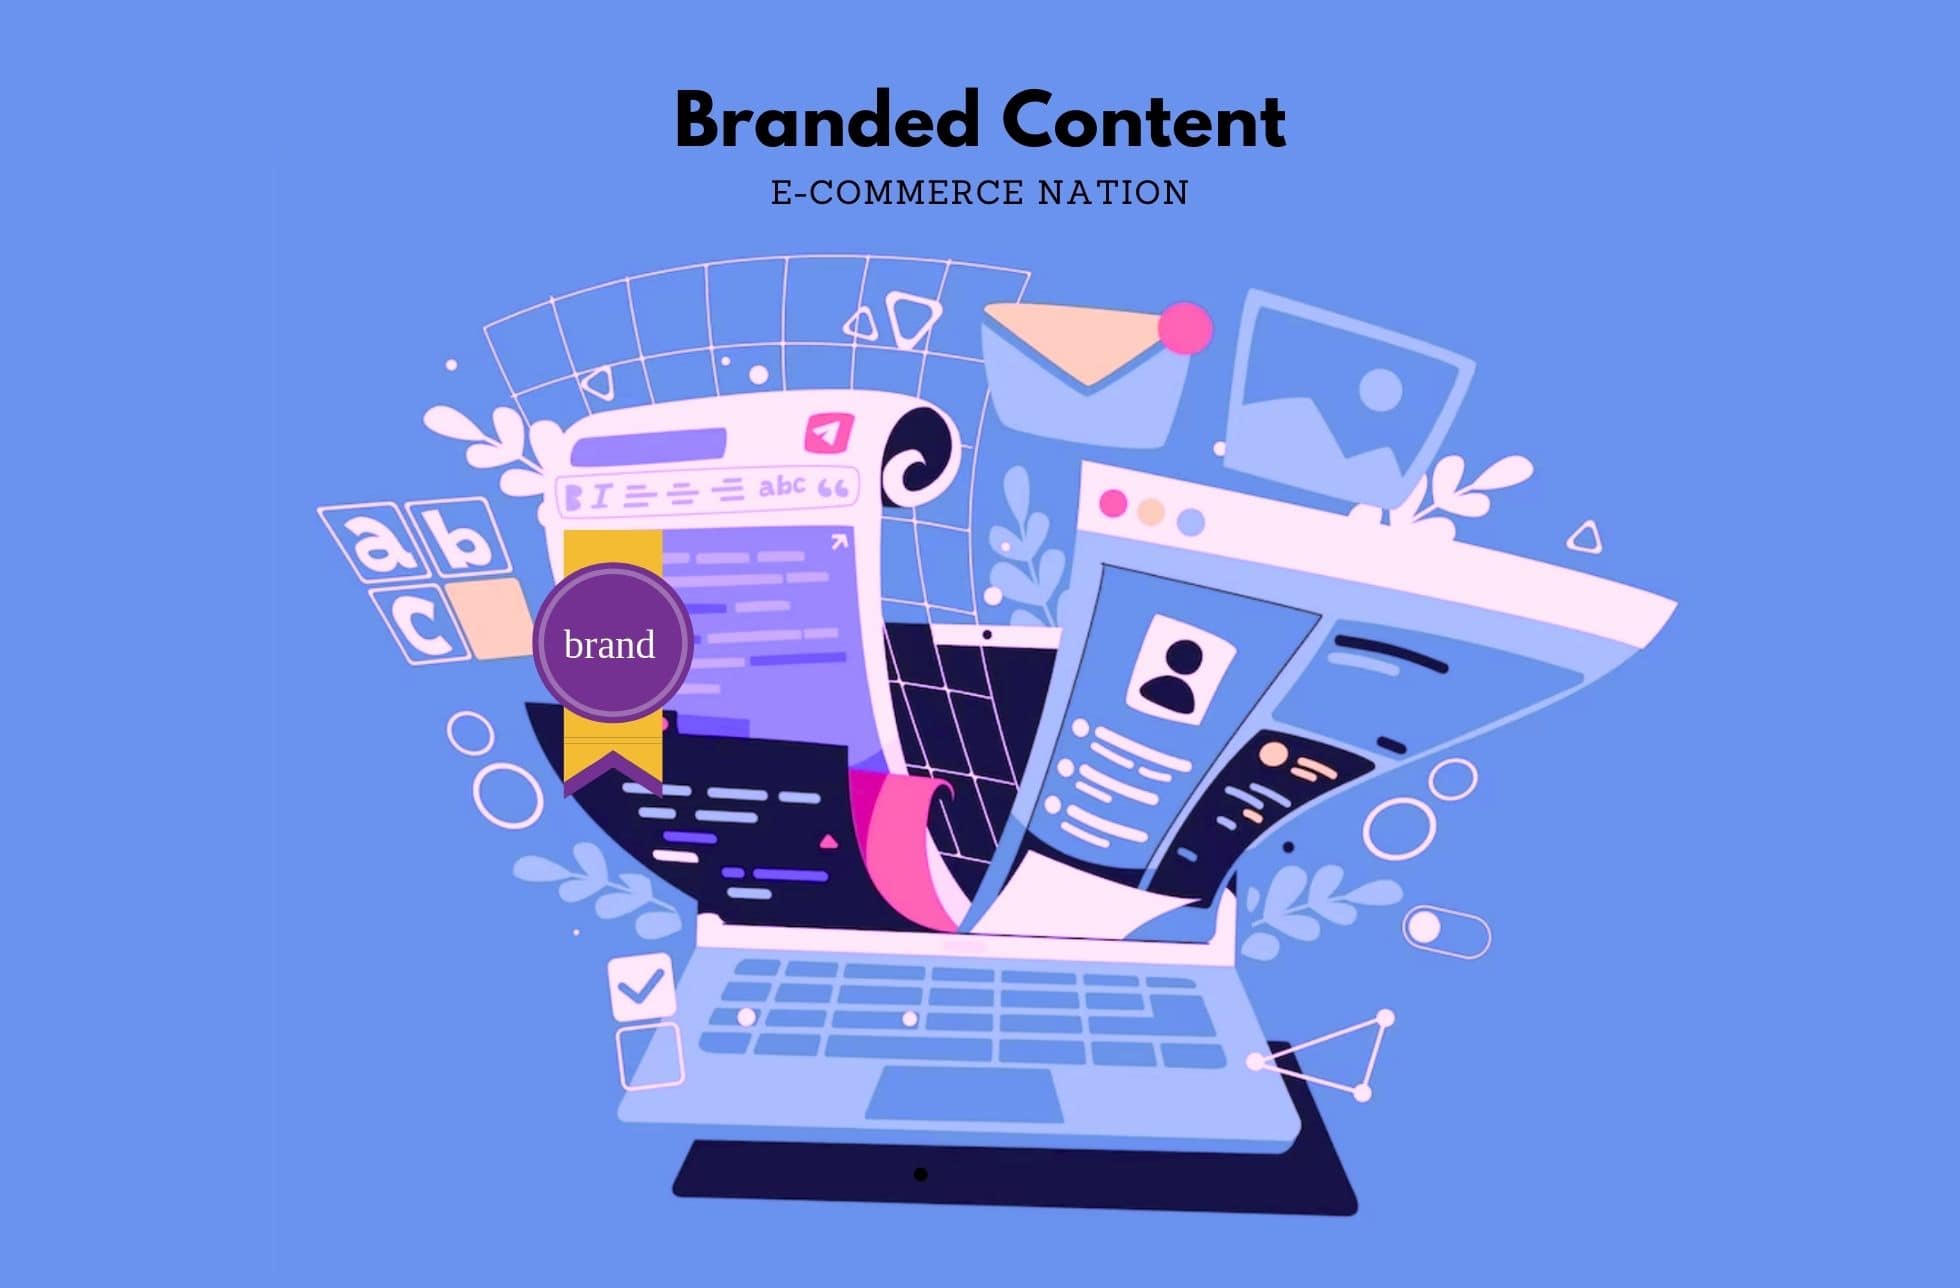 Branded Content marketing